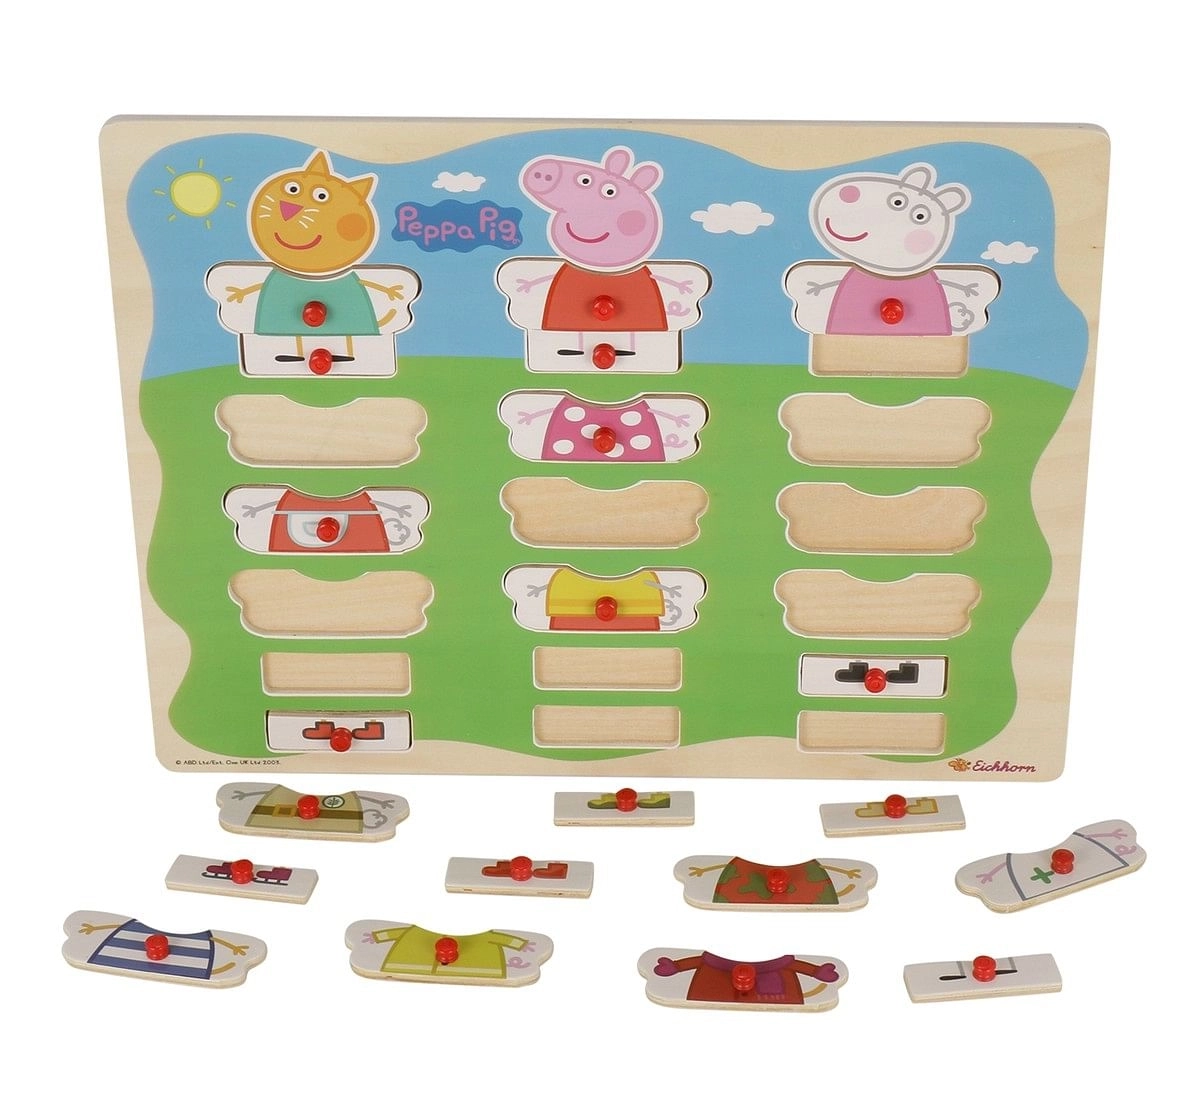 Simba Peppa Pig, Mix And Match for Kids, 2Y+ (Multicolor)